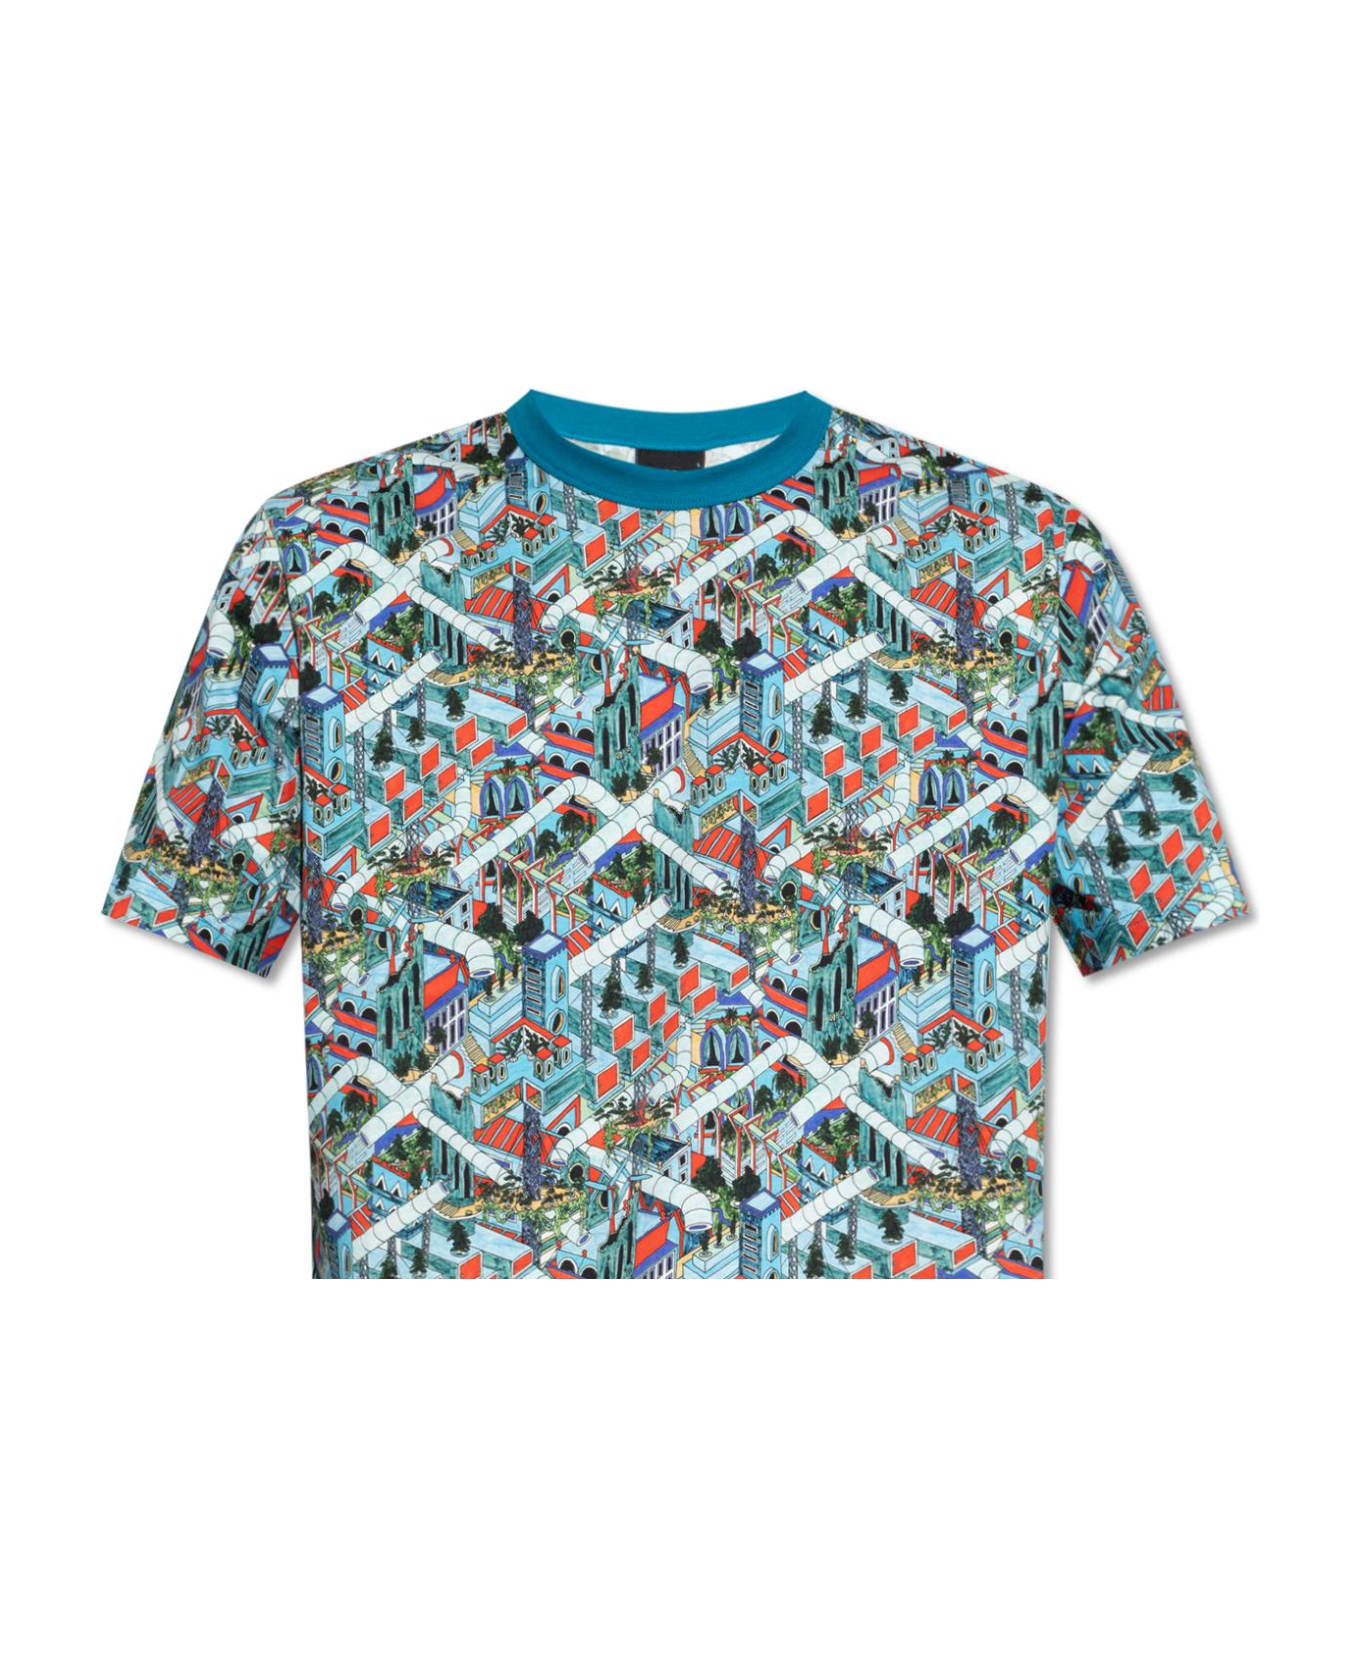 PS by Paul Smith Ps Paul Smith Patterned T-shirt - Blue